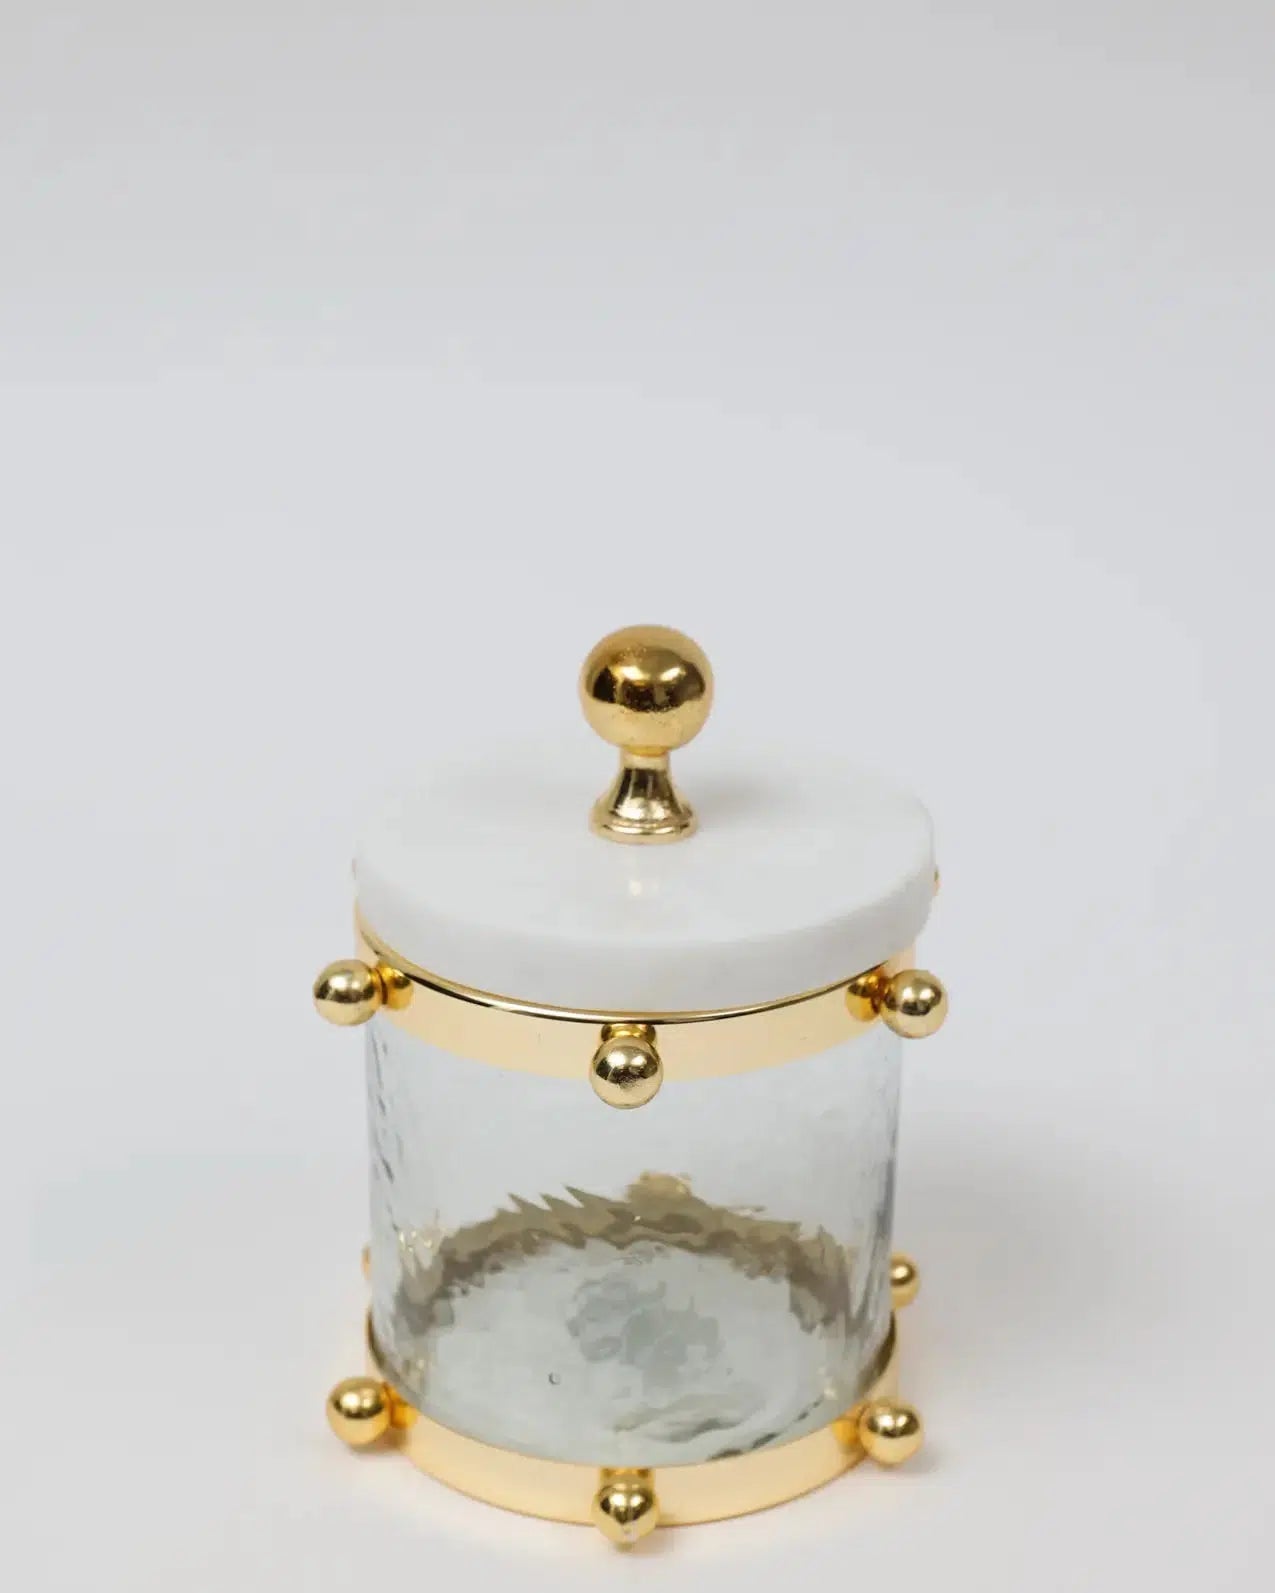 Hammered Glass Canister w/ Gold Ball Design and Marble Cover Canisters High Class Touch - Home Decor Small 